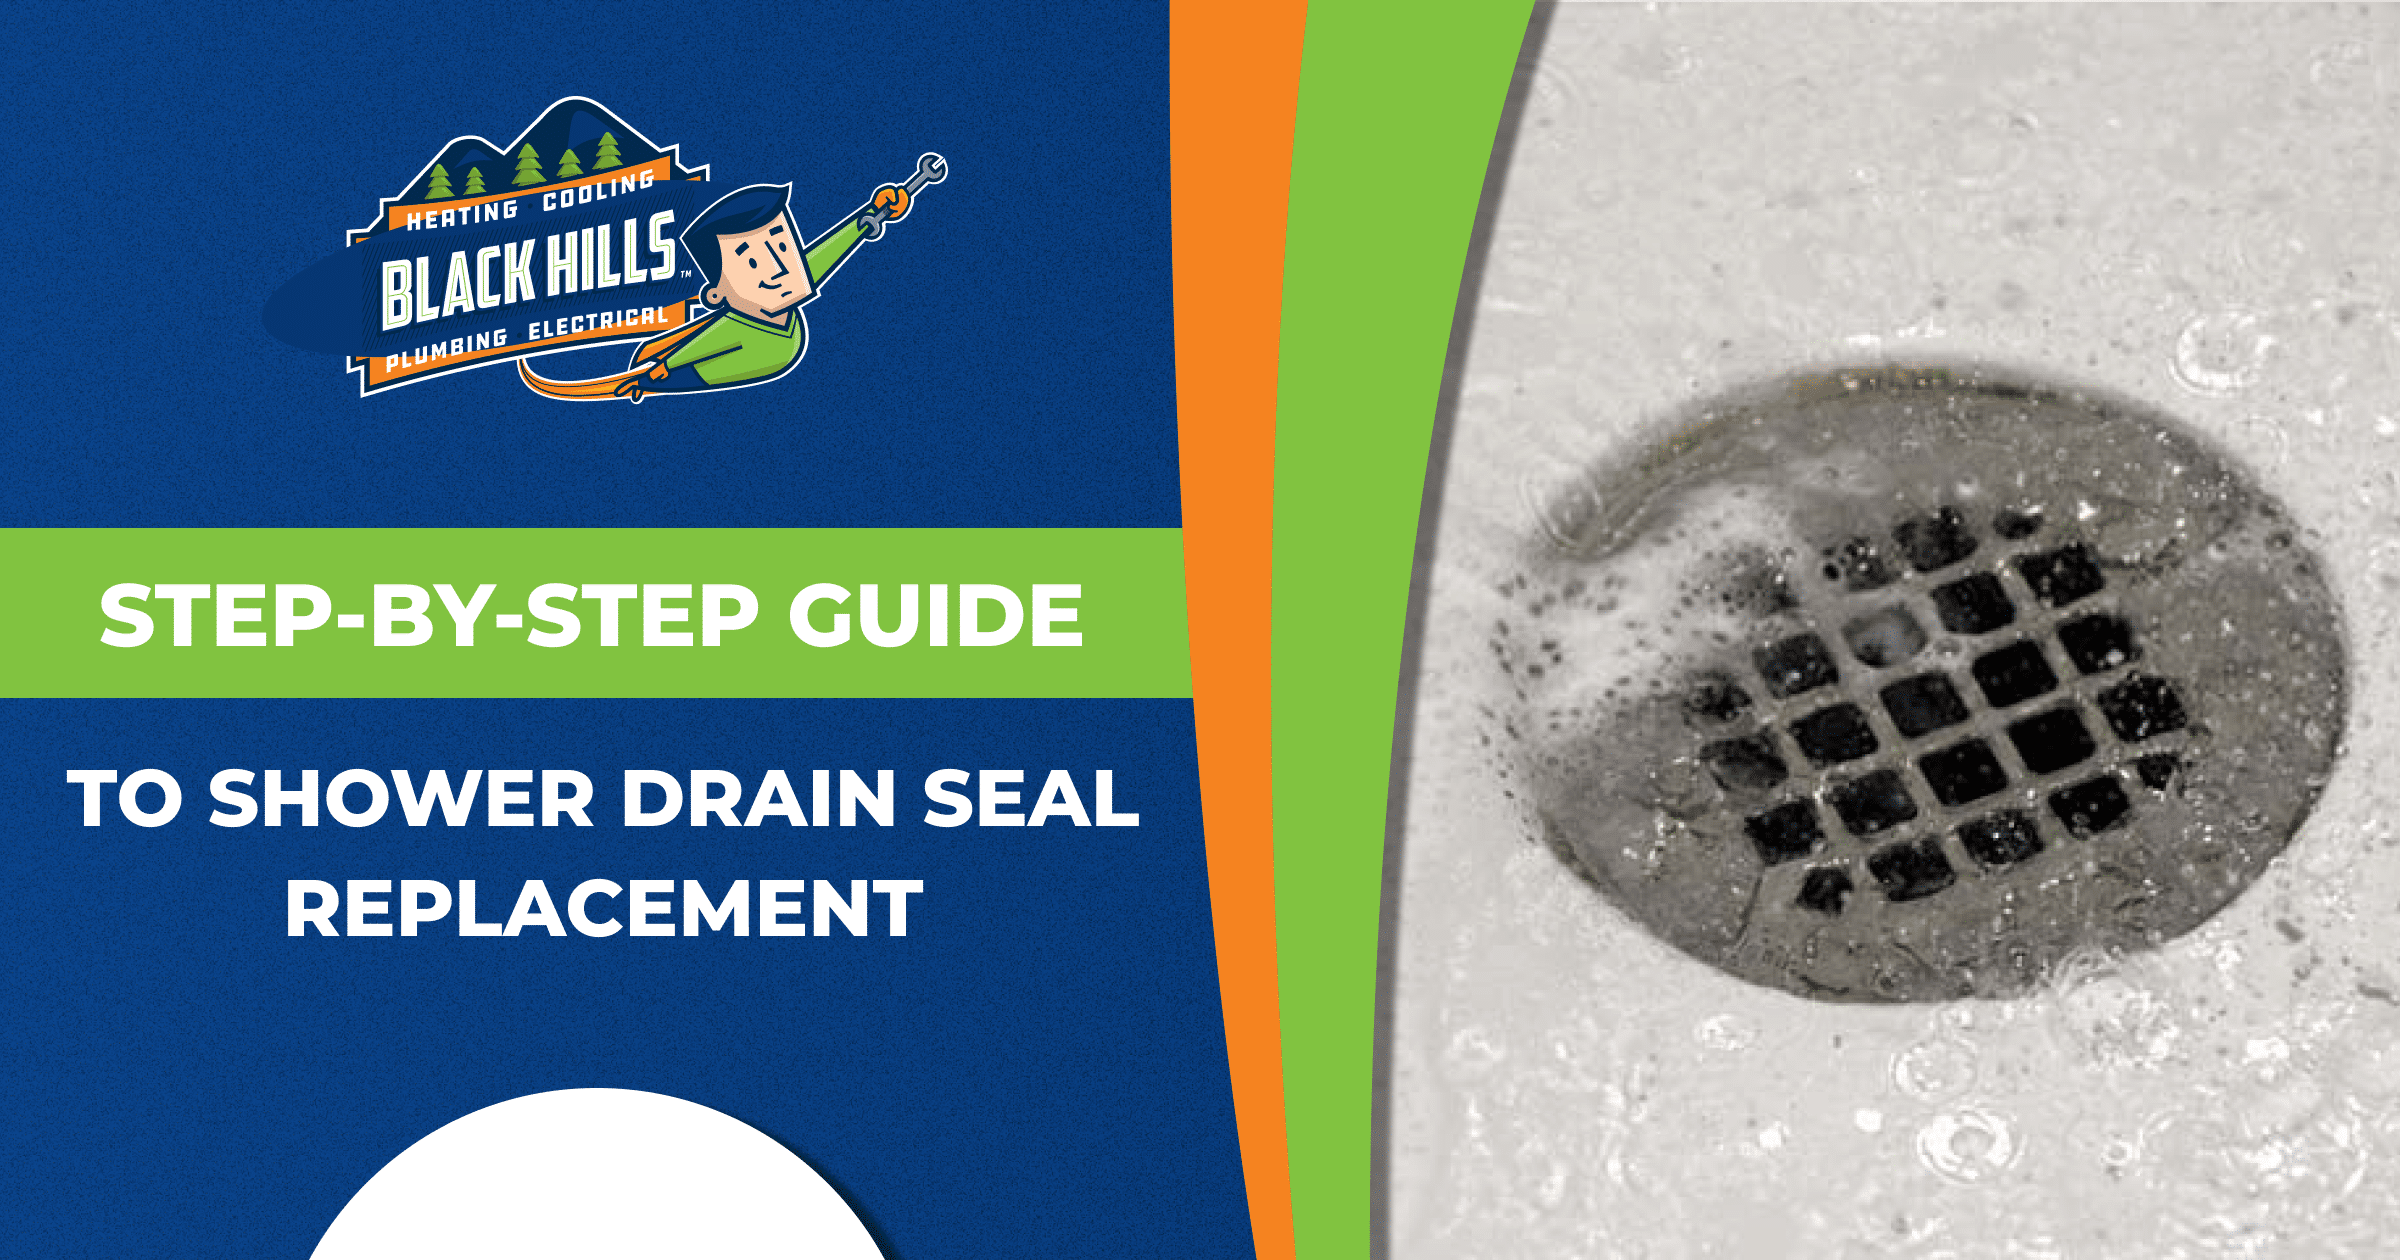 https://www.blackhillsinc.com/wp-content/uploads/2022/10/Week-1-Oct-2022-Black-Hills-Step-by-Step-Guide-to-Shower-Drain-Seal-Replacement.png